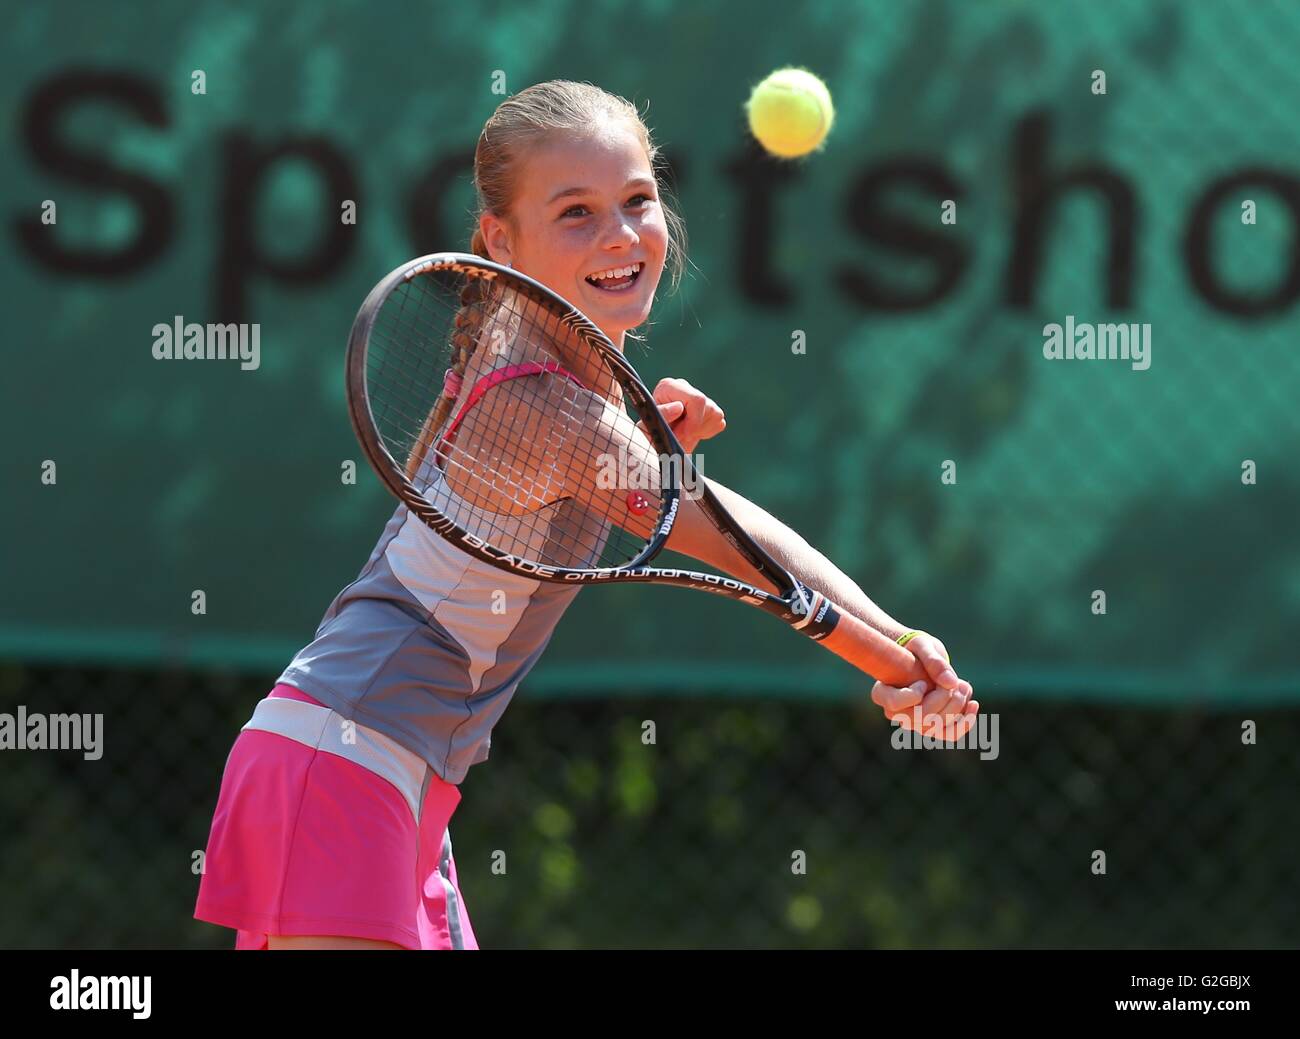 Girl, 11, playing tennis, hitting a forehand volley, Munich, Upper Bavaria, Bavaria, Germany Stock Photo